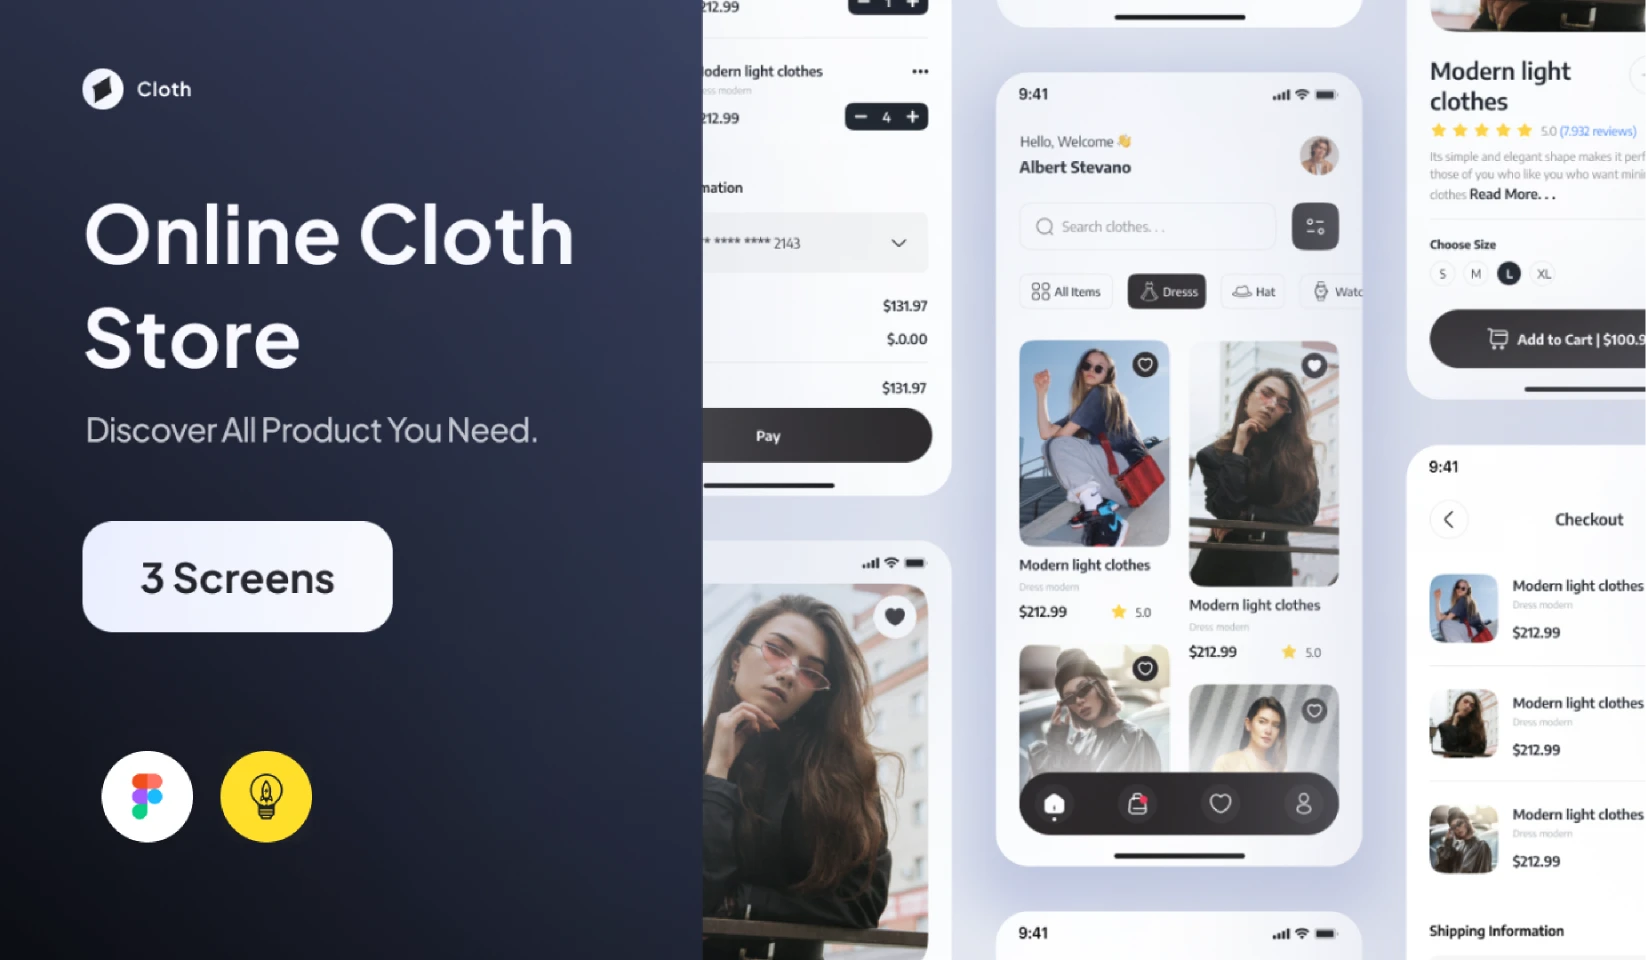 eCommerce Clothing Store - Mobile App Design for Figma and Adobe XD